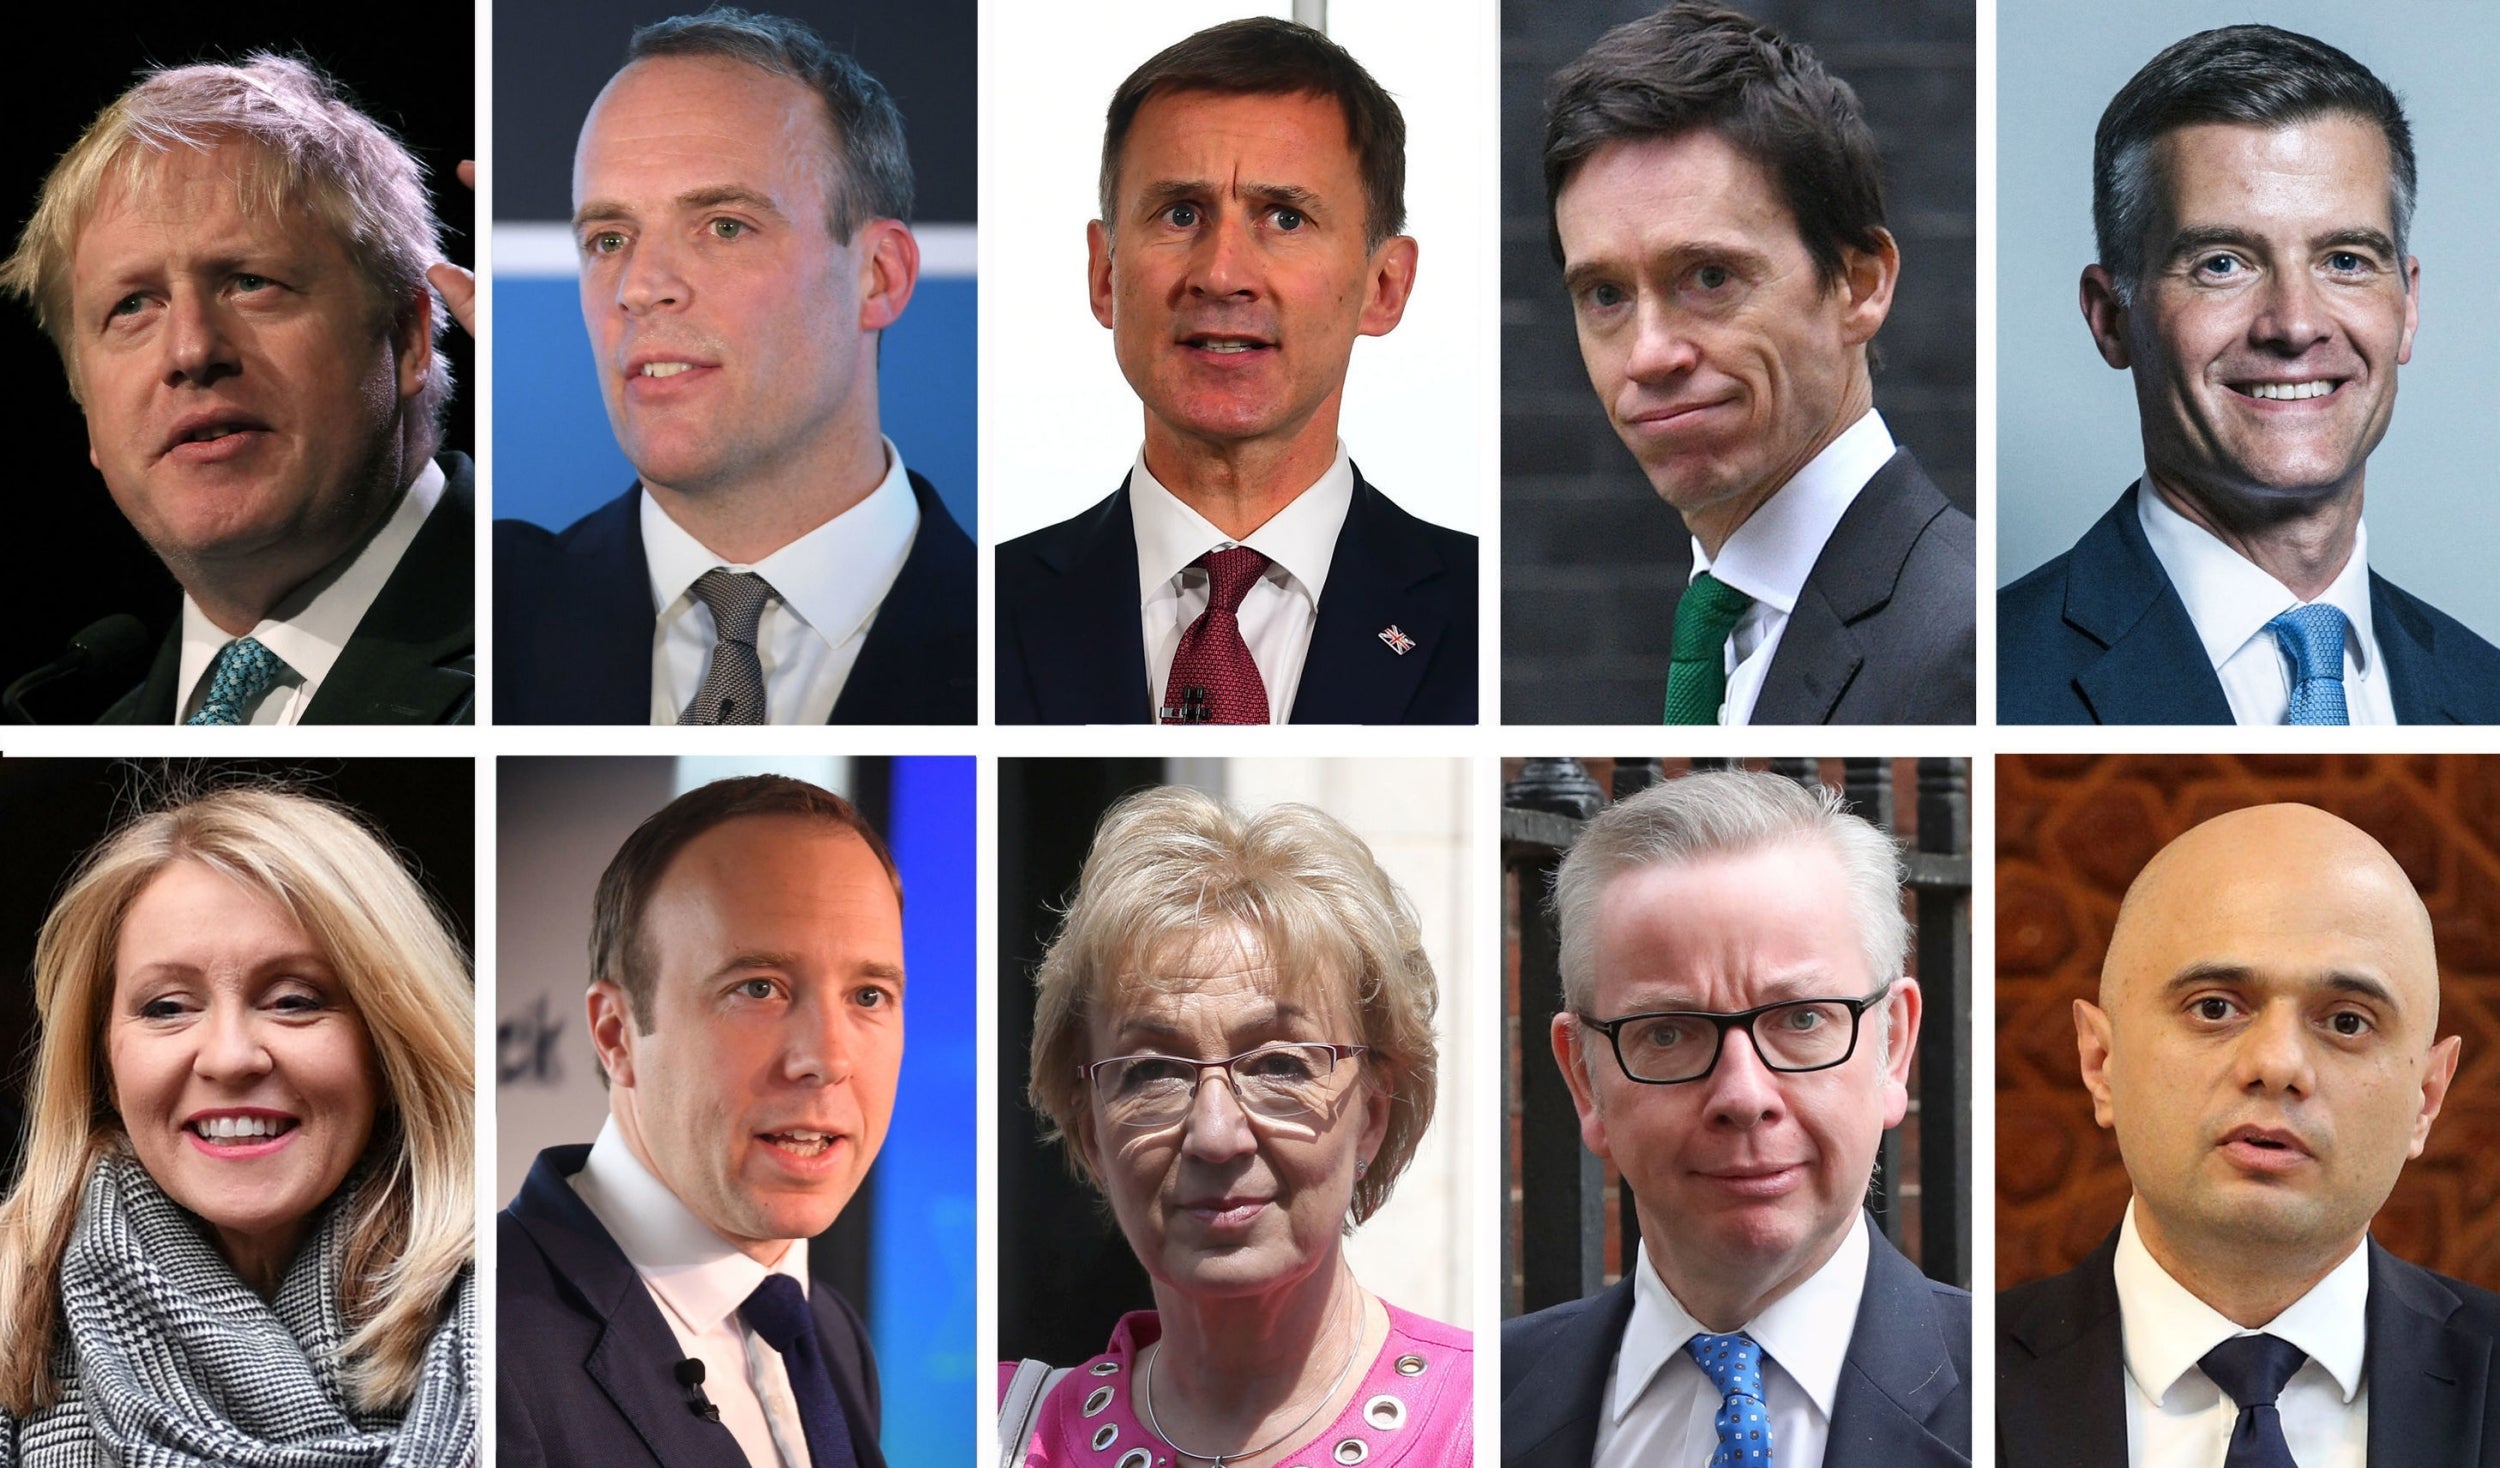 The ten contenders in the Conservative leadership race (top row, left to right) Boris Johnson, Dominic Raab, Jeremy Hunt, Rory Stewart and Mark Harper, (bottom row, left to right) Esther McVey, Matt Hancock, Andrea Leadsom, Michael Gove and Sajid Javid